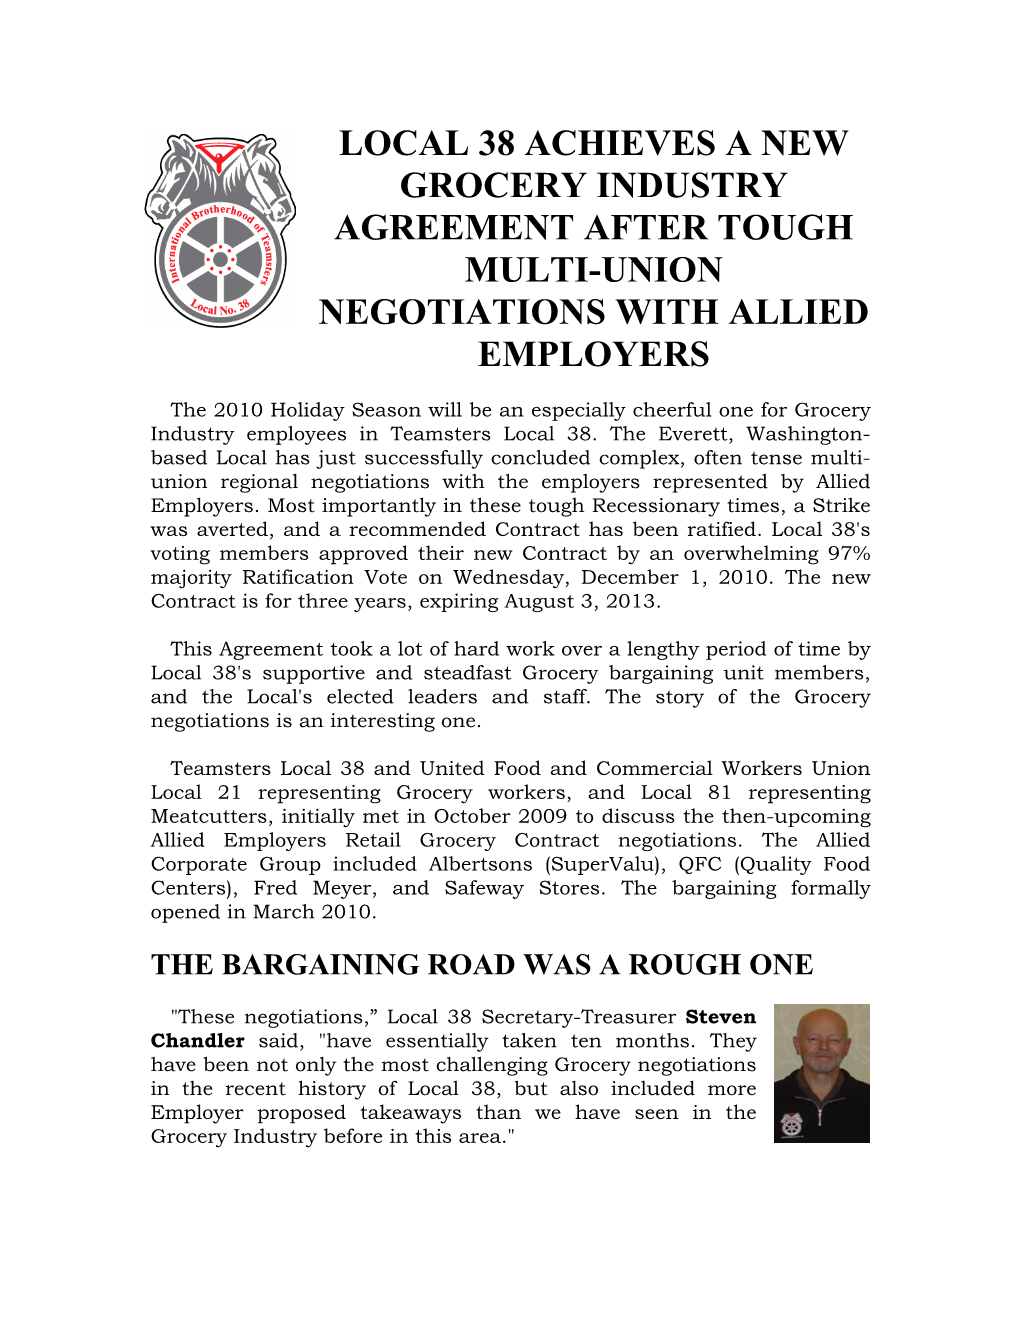 Local 38 Achieves a New Grocery Industry Agreement After Tough Multi-Union Negotiations with Allied Employers